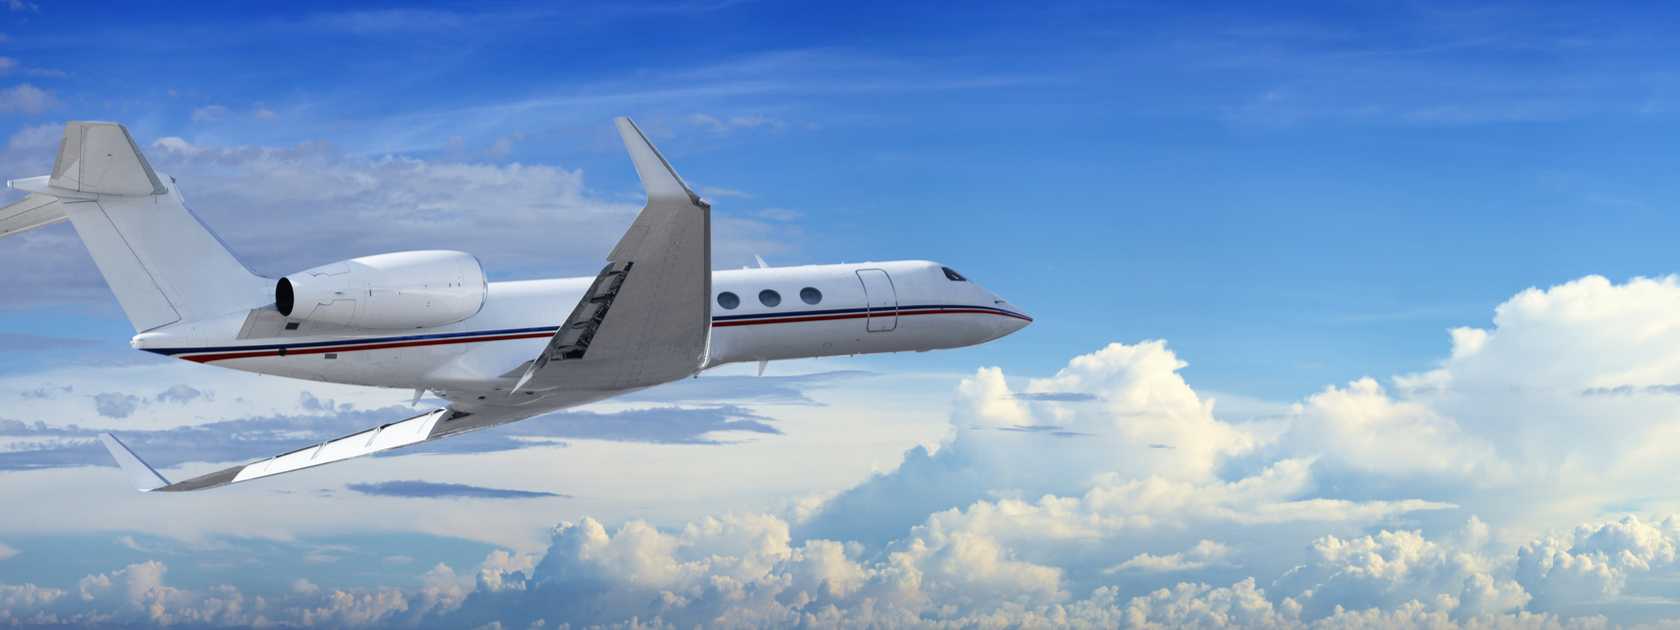 The Benefits of Private Jet Travel for Business Privaira